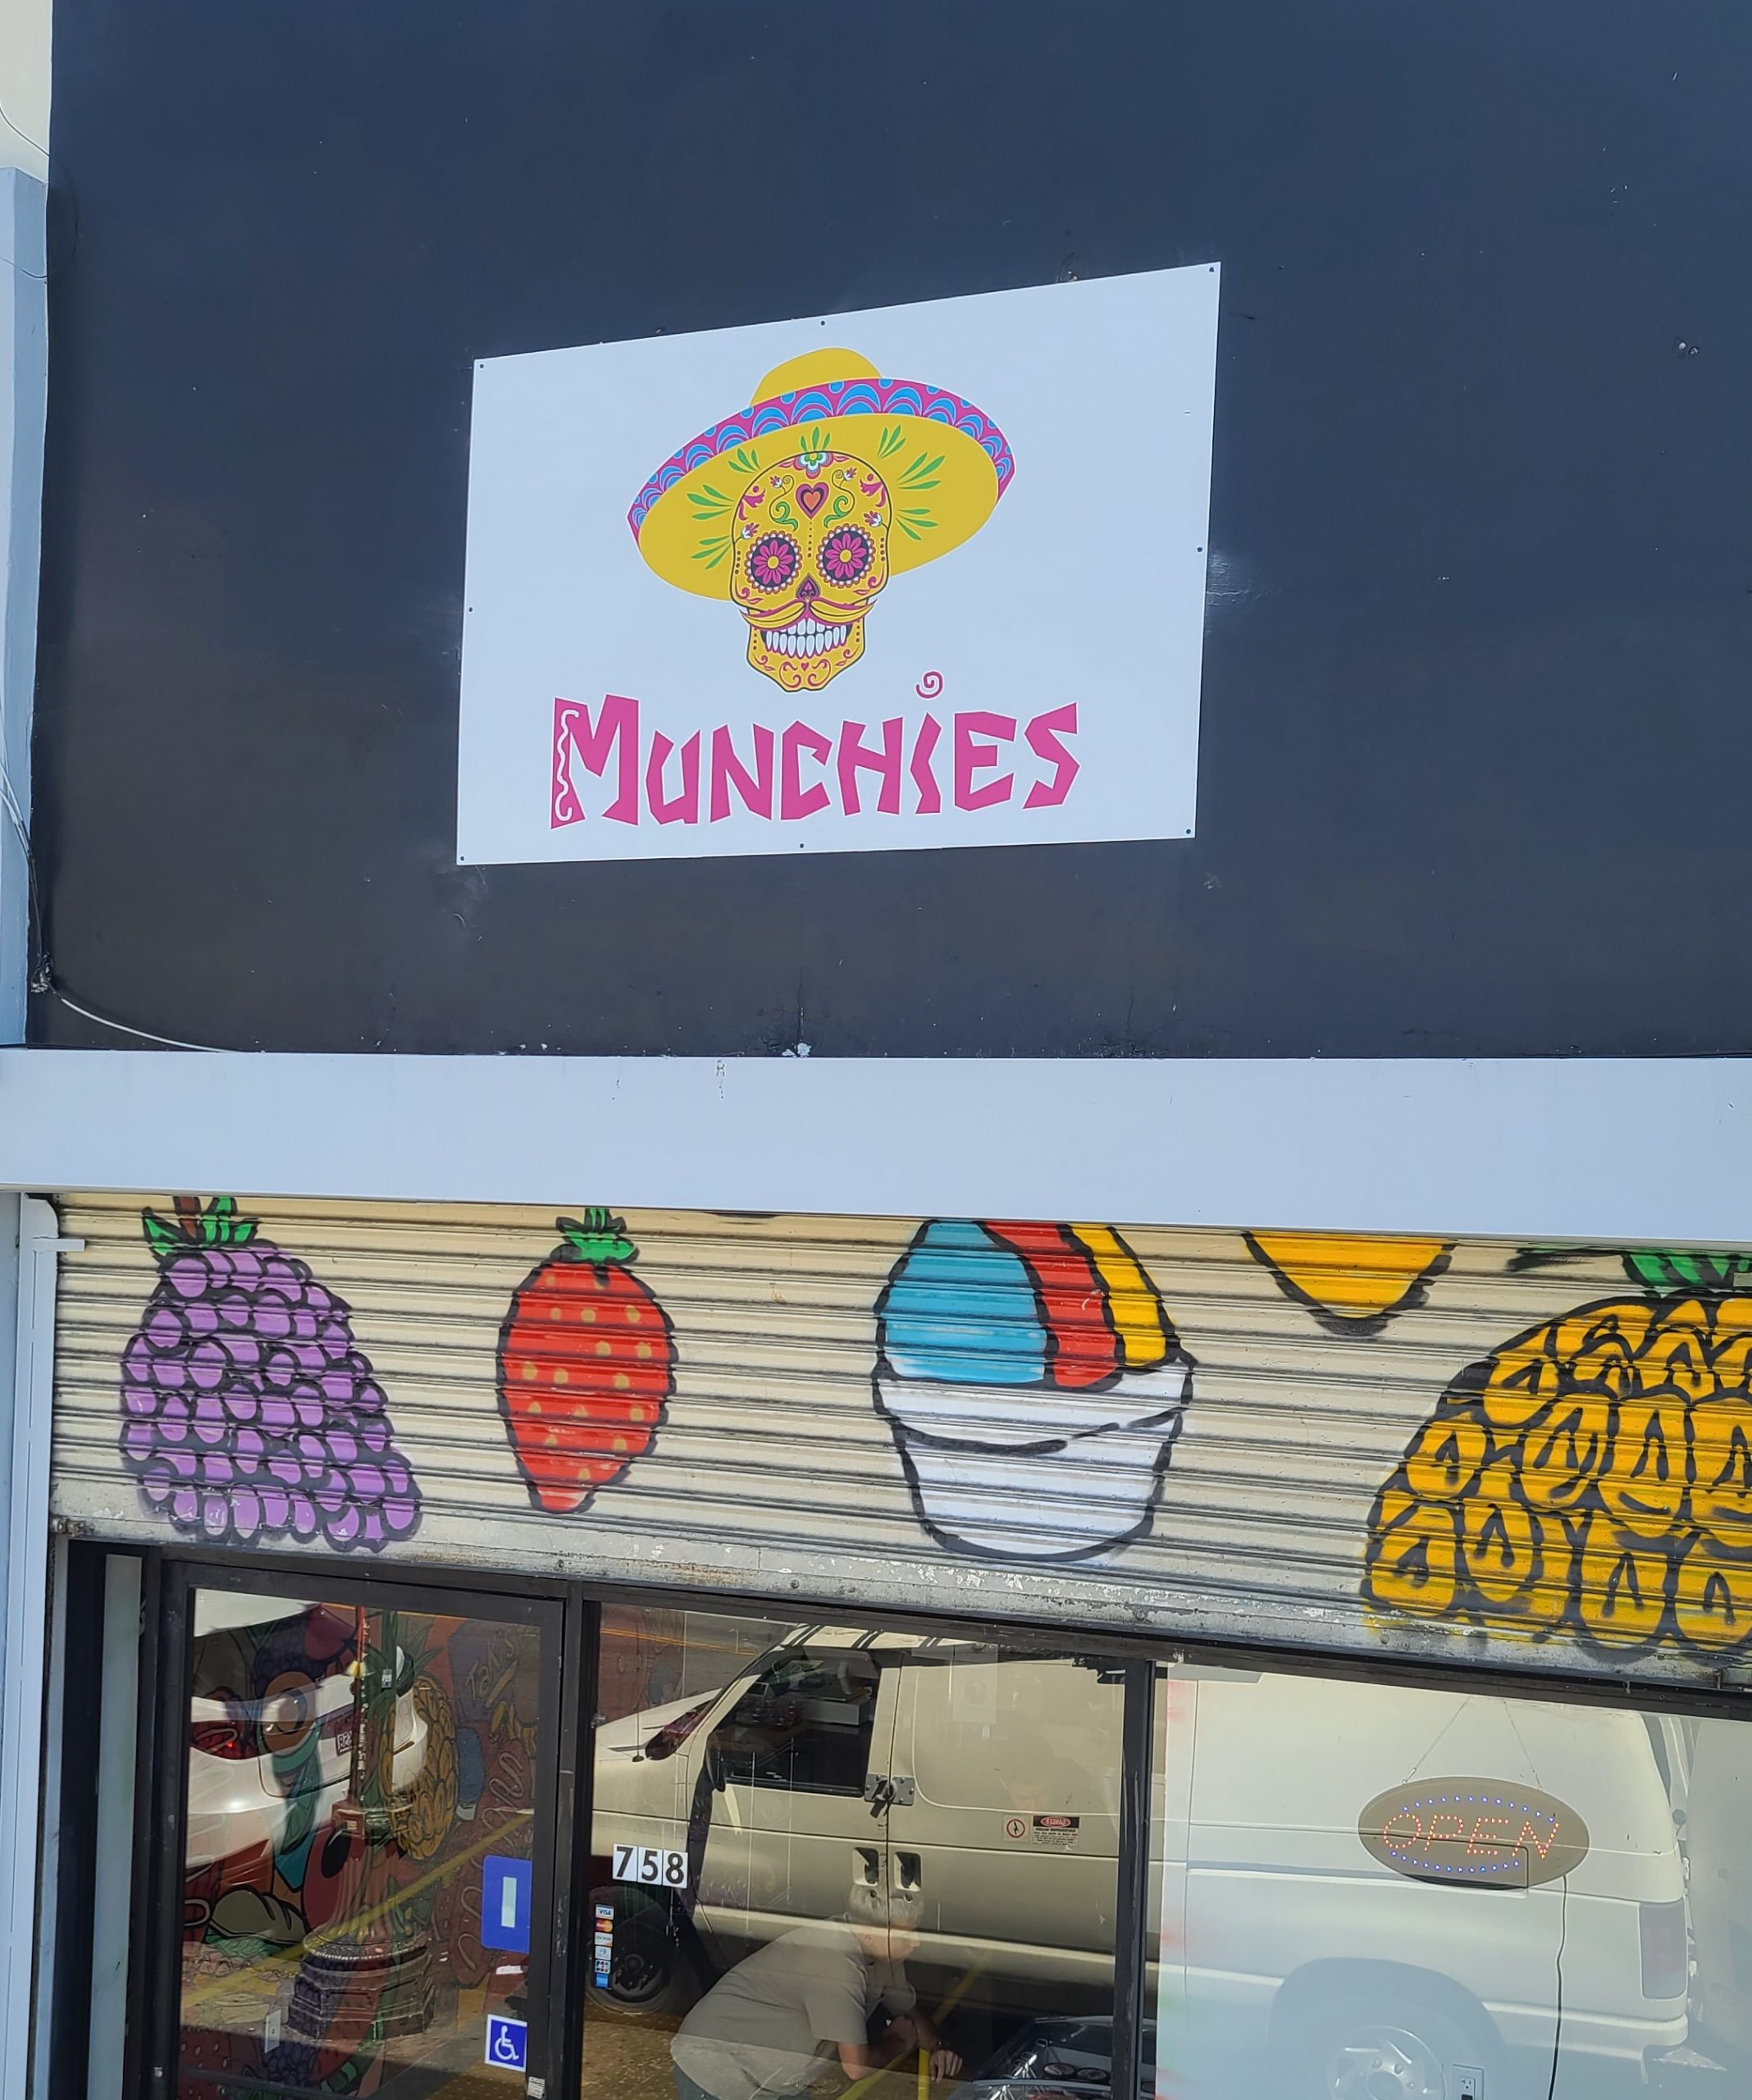 This is the storefront sign we made for Munchies, the restaurant sign has an eyecatching Día de los Muertos skull printed design.